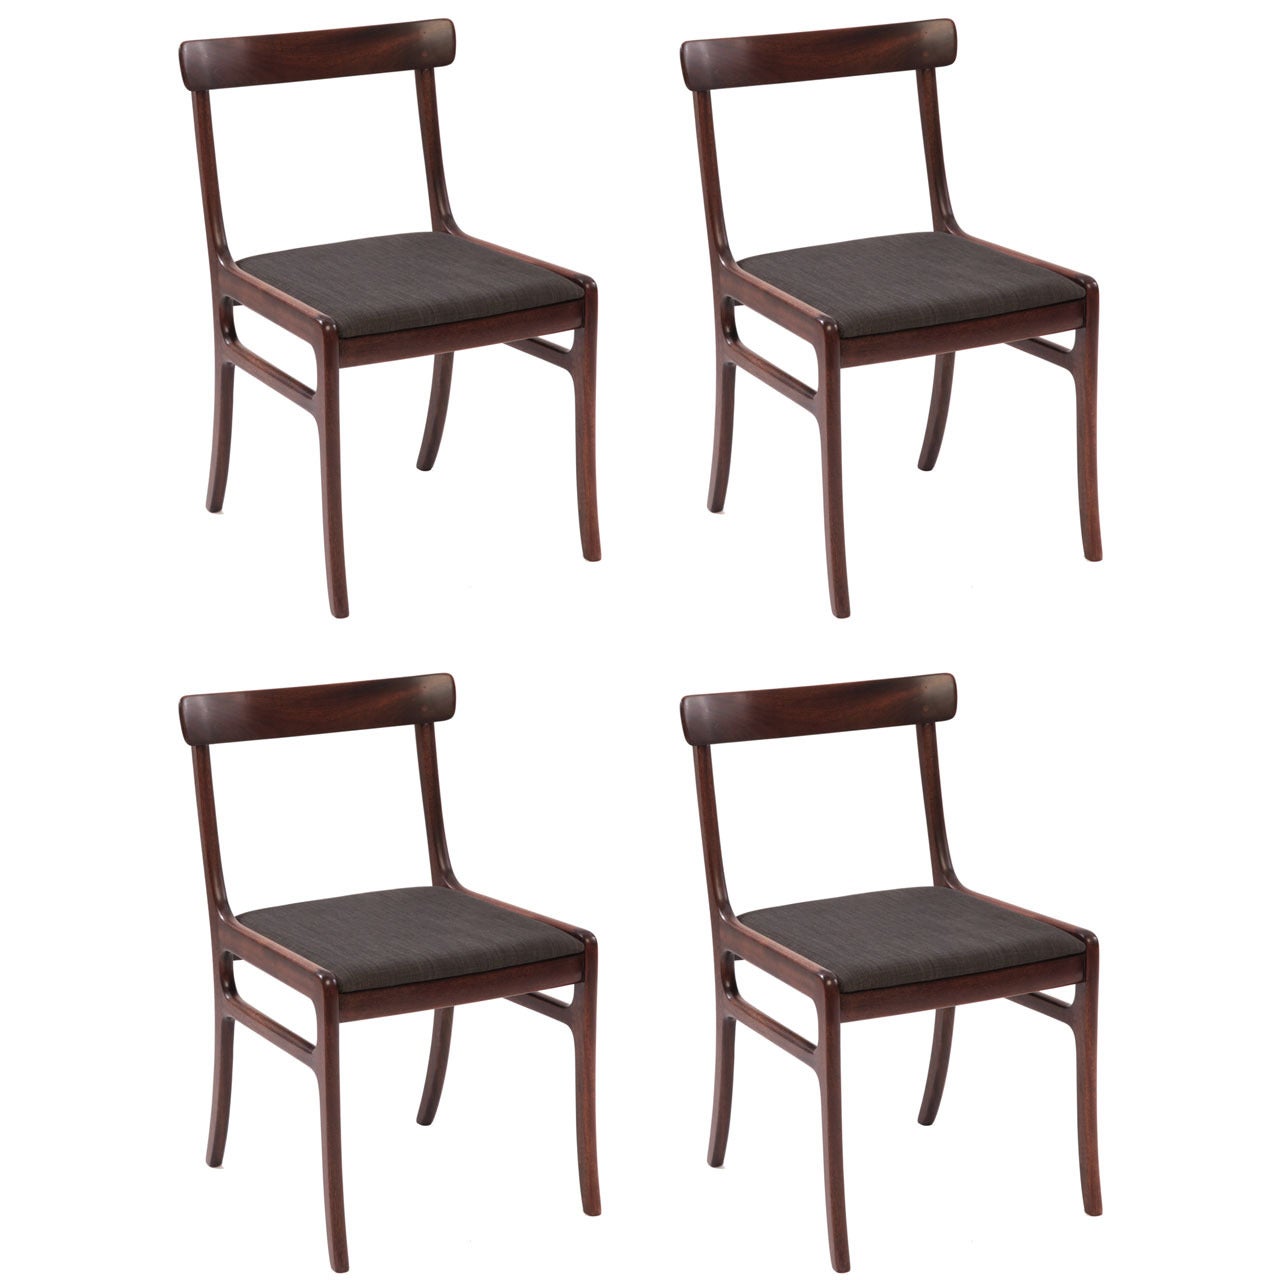 Ole Wanscher Mahogany Dining Chairs